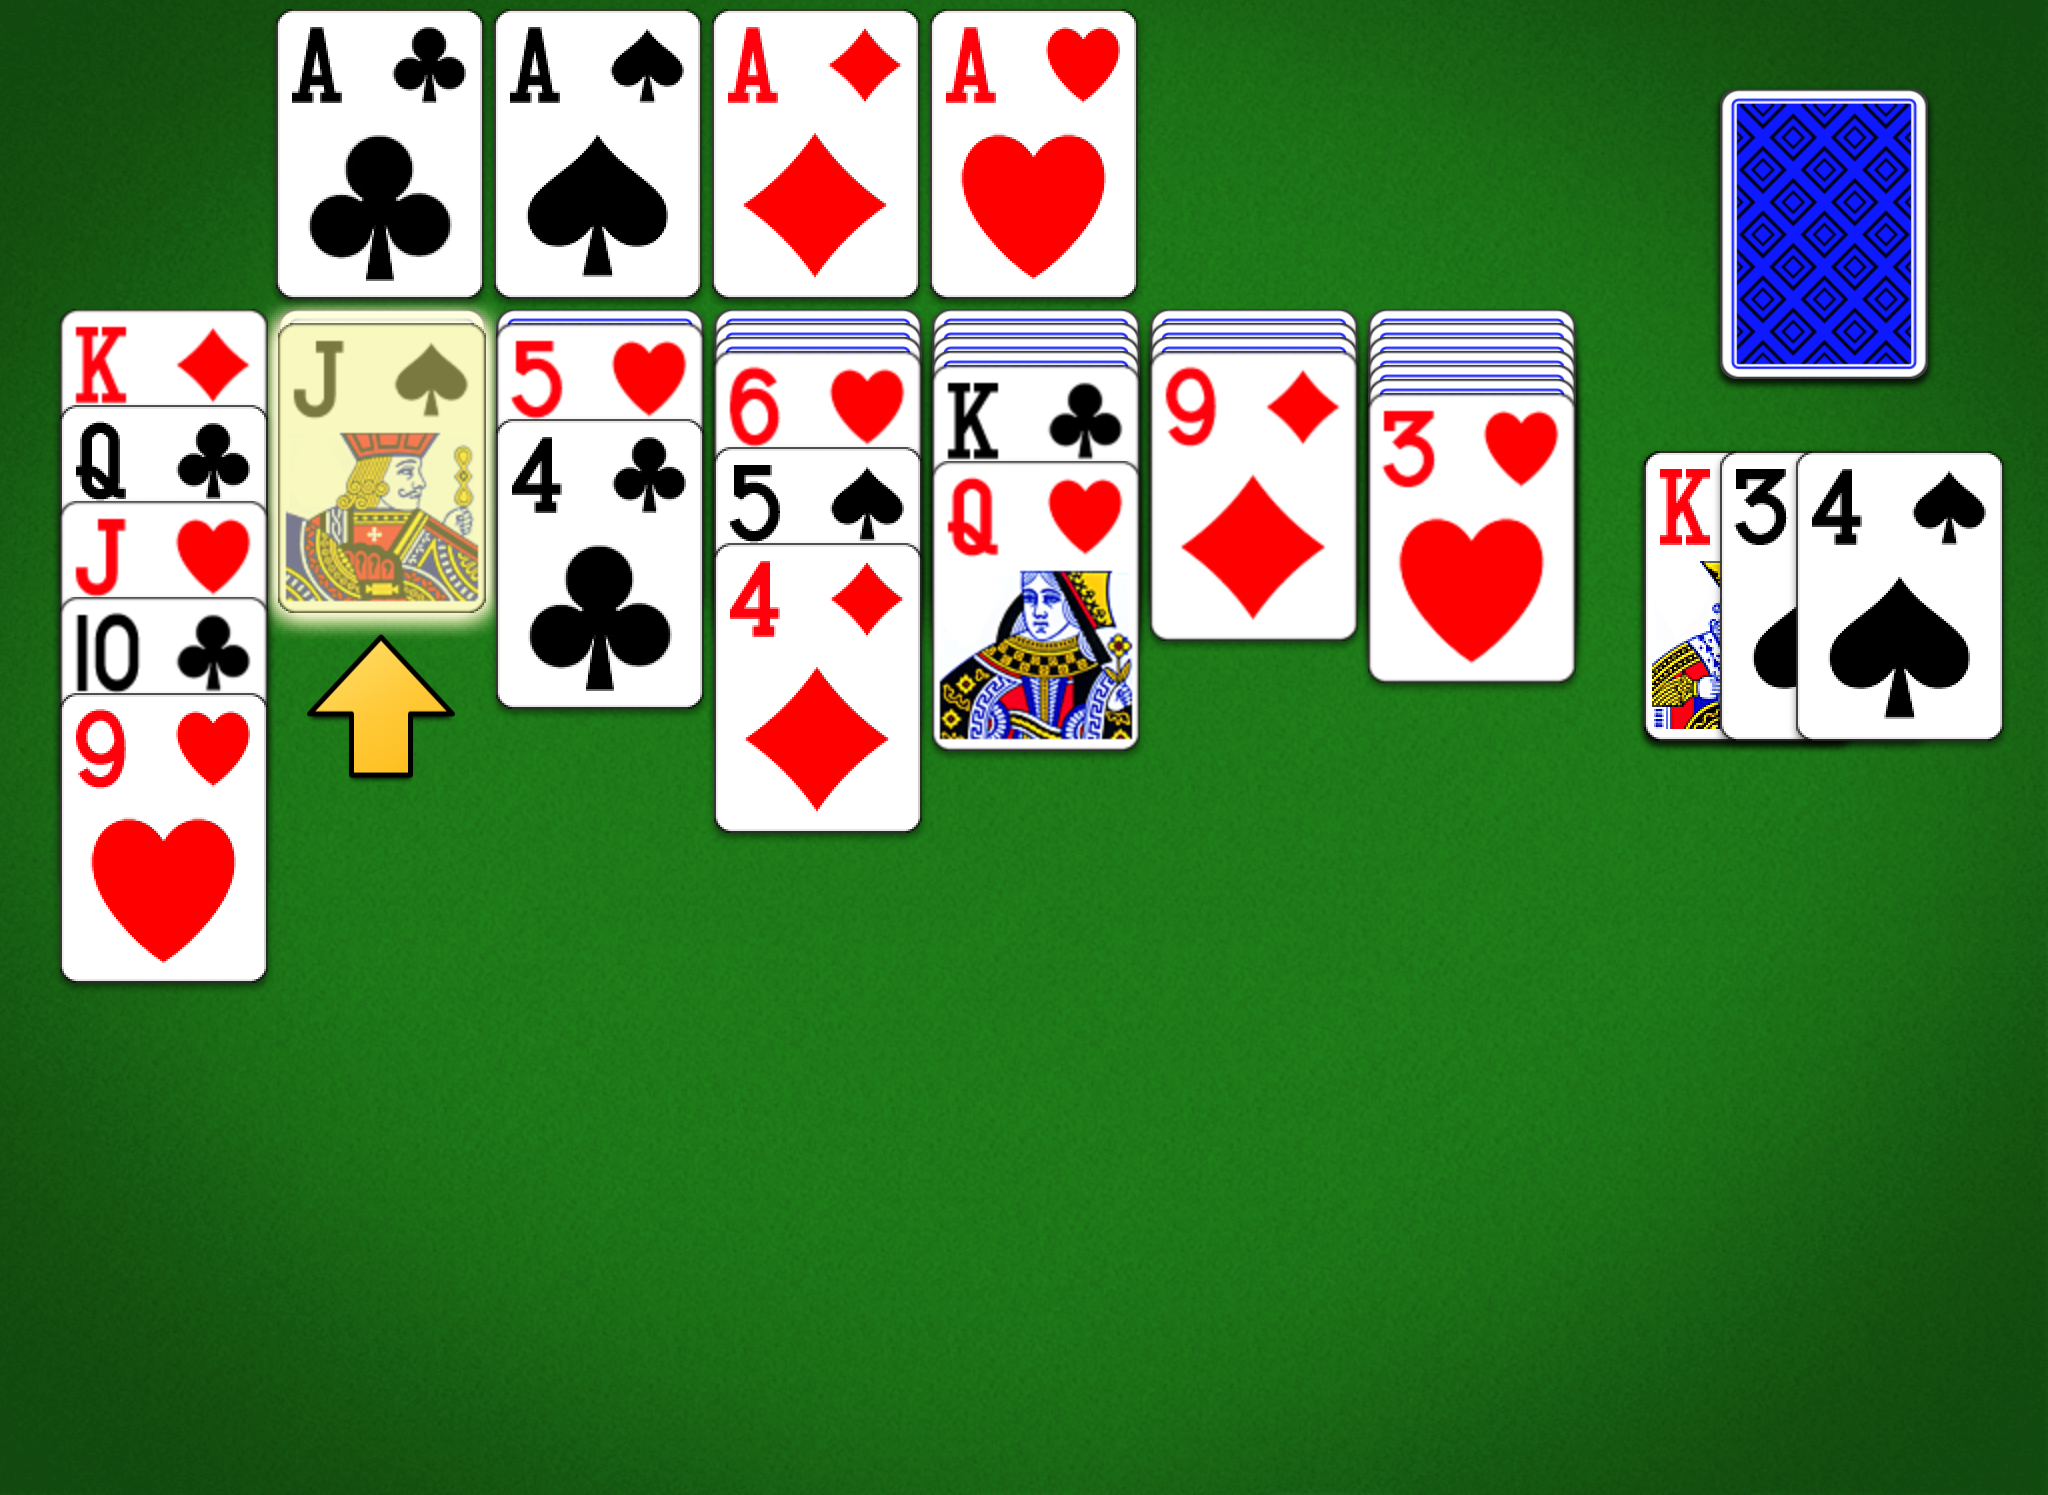 Solitaire by MobilityWare  Play Solitaire Online for Free